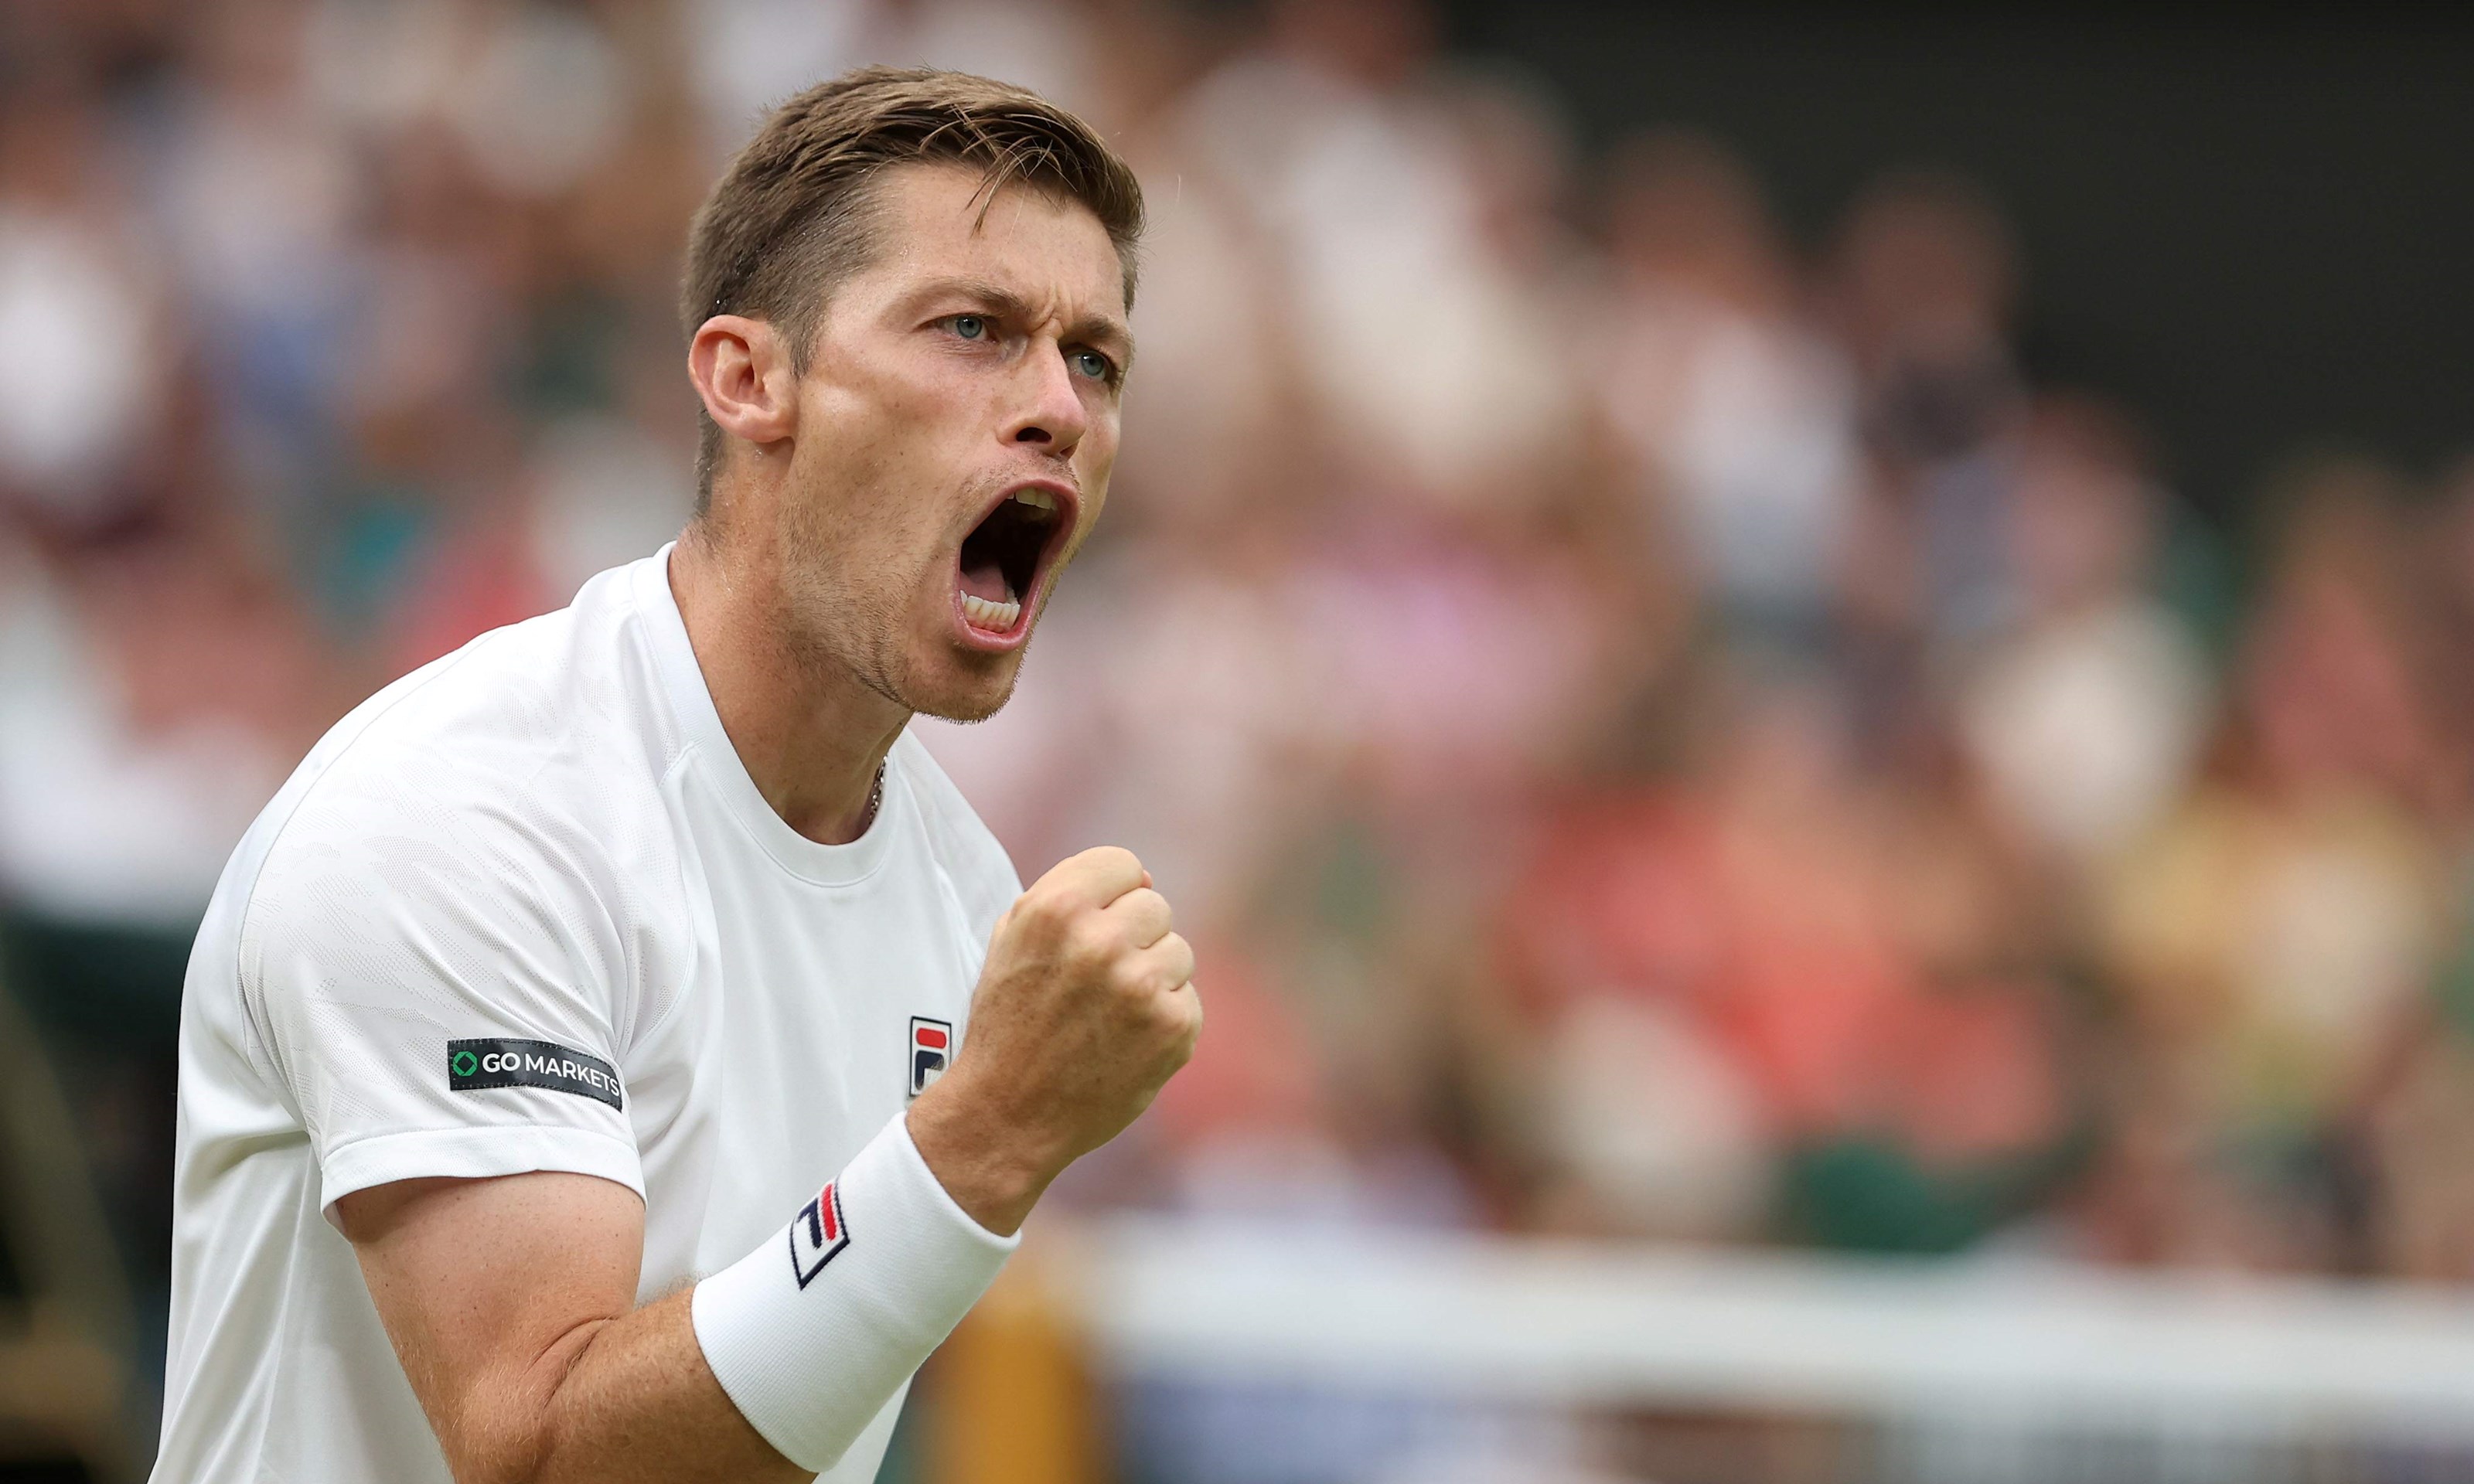 Neal Skupski clenching his fist on court at the Wimbledon final